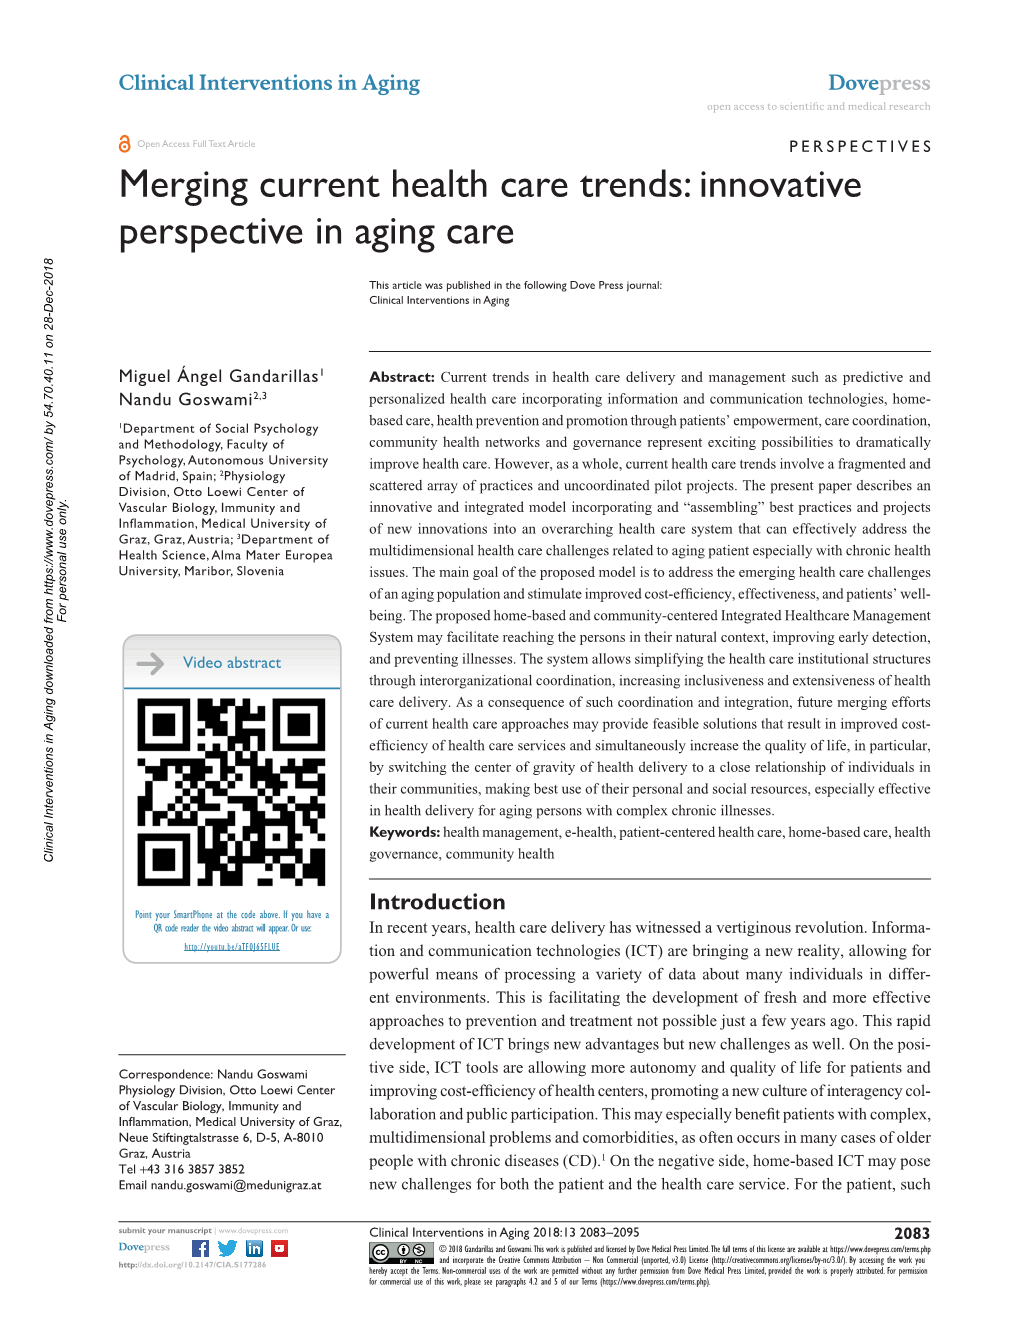 Innovative Perspective in Aging Care Open Access to Scientific and Medical Research DOI: 177286